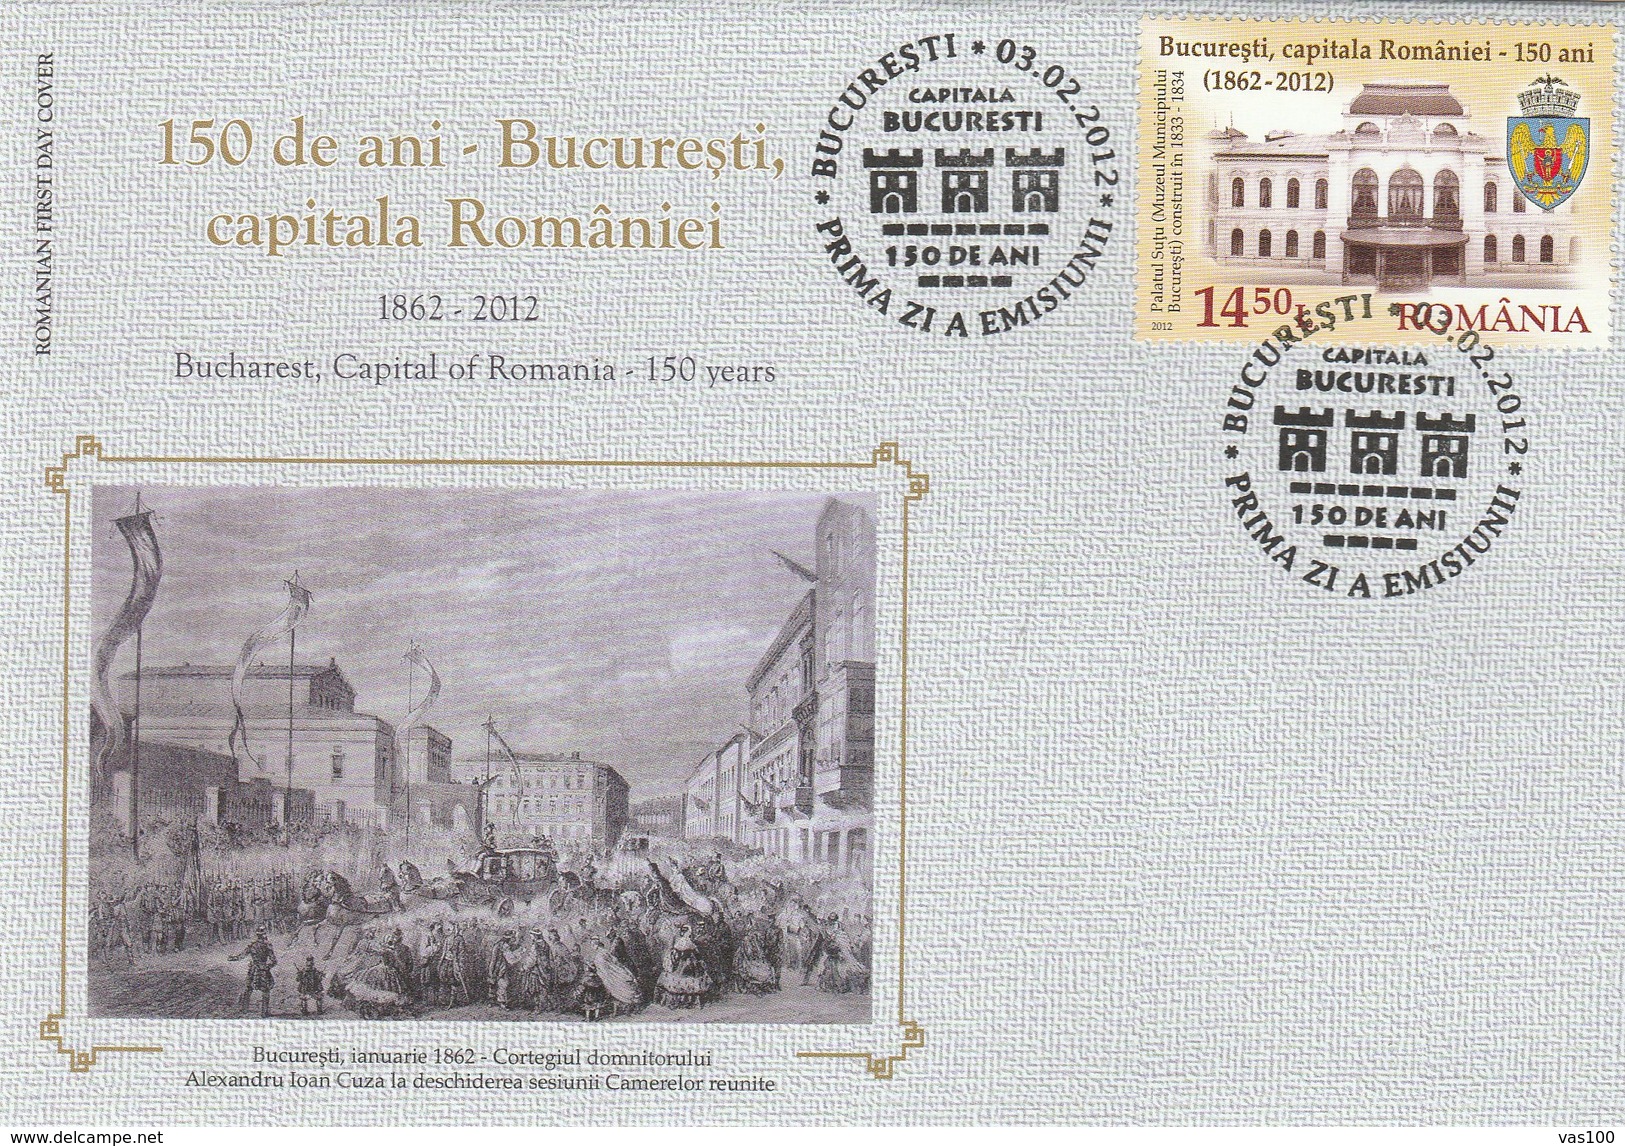 BUCHAREST ,CAPITAL OF ROMANIA,150 YEARS,2012 COVER FDC ROMANIA. - FDC